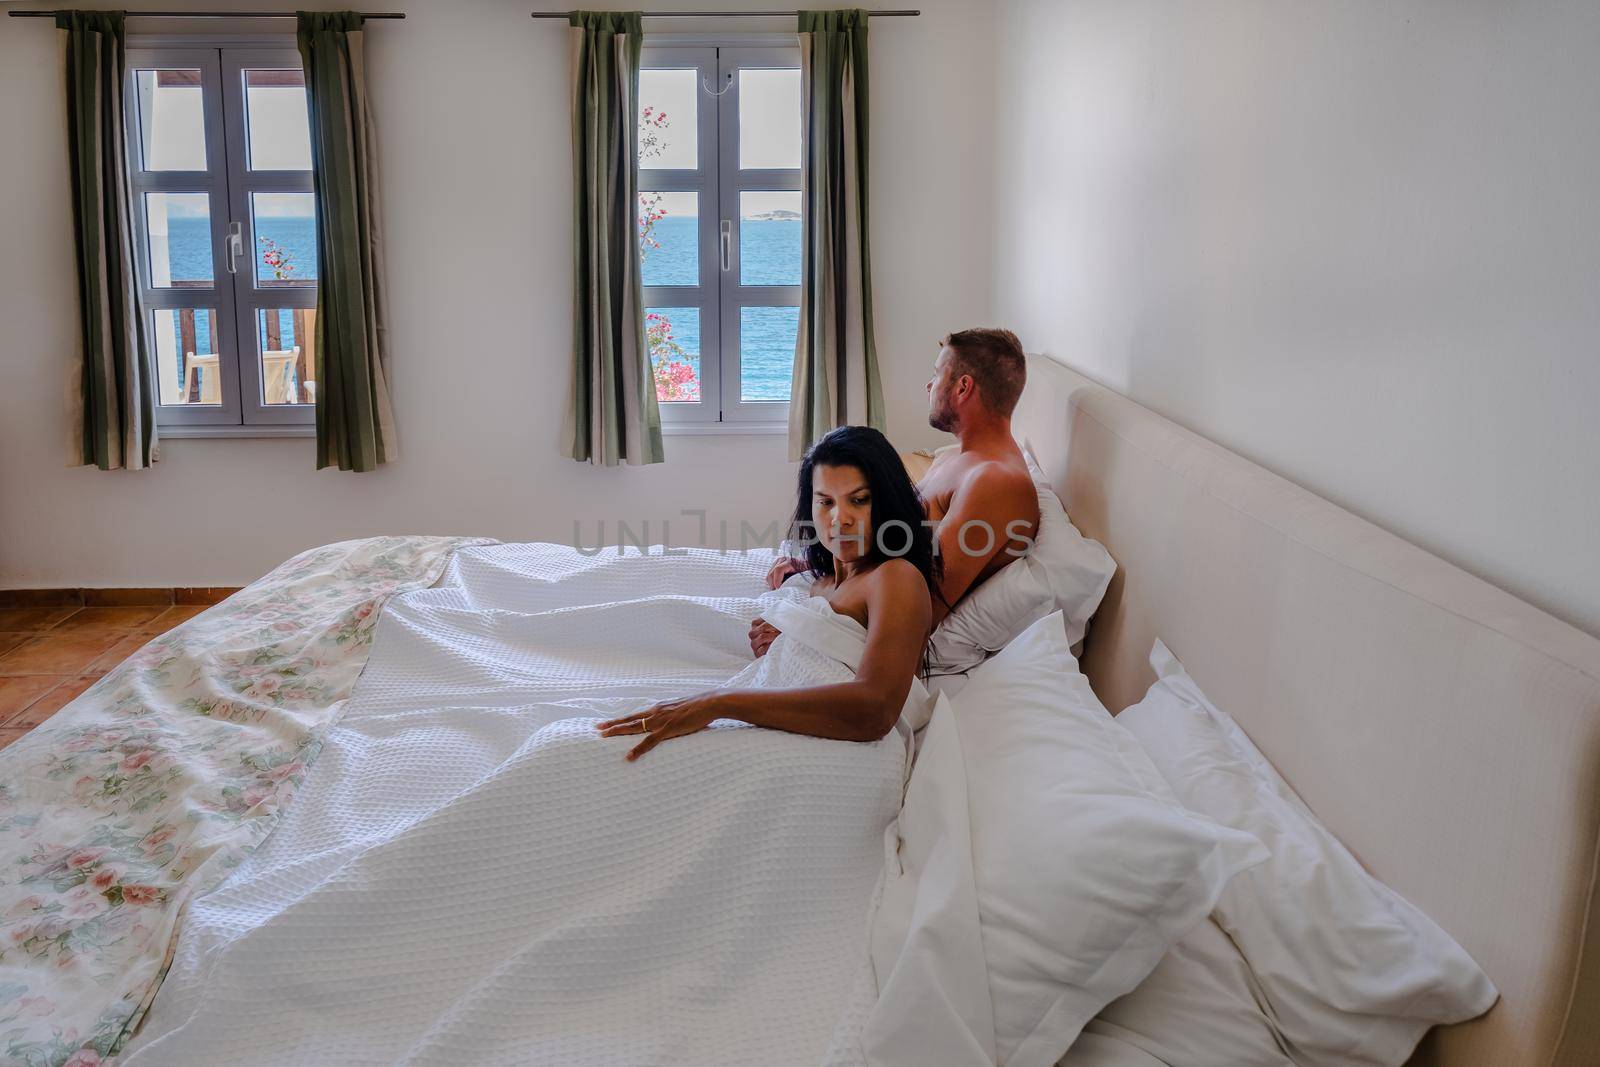 couple in white bed looking out over ocean during luxury vacation in Greece. High quality photo